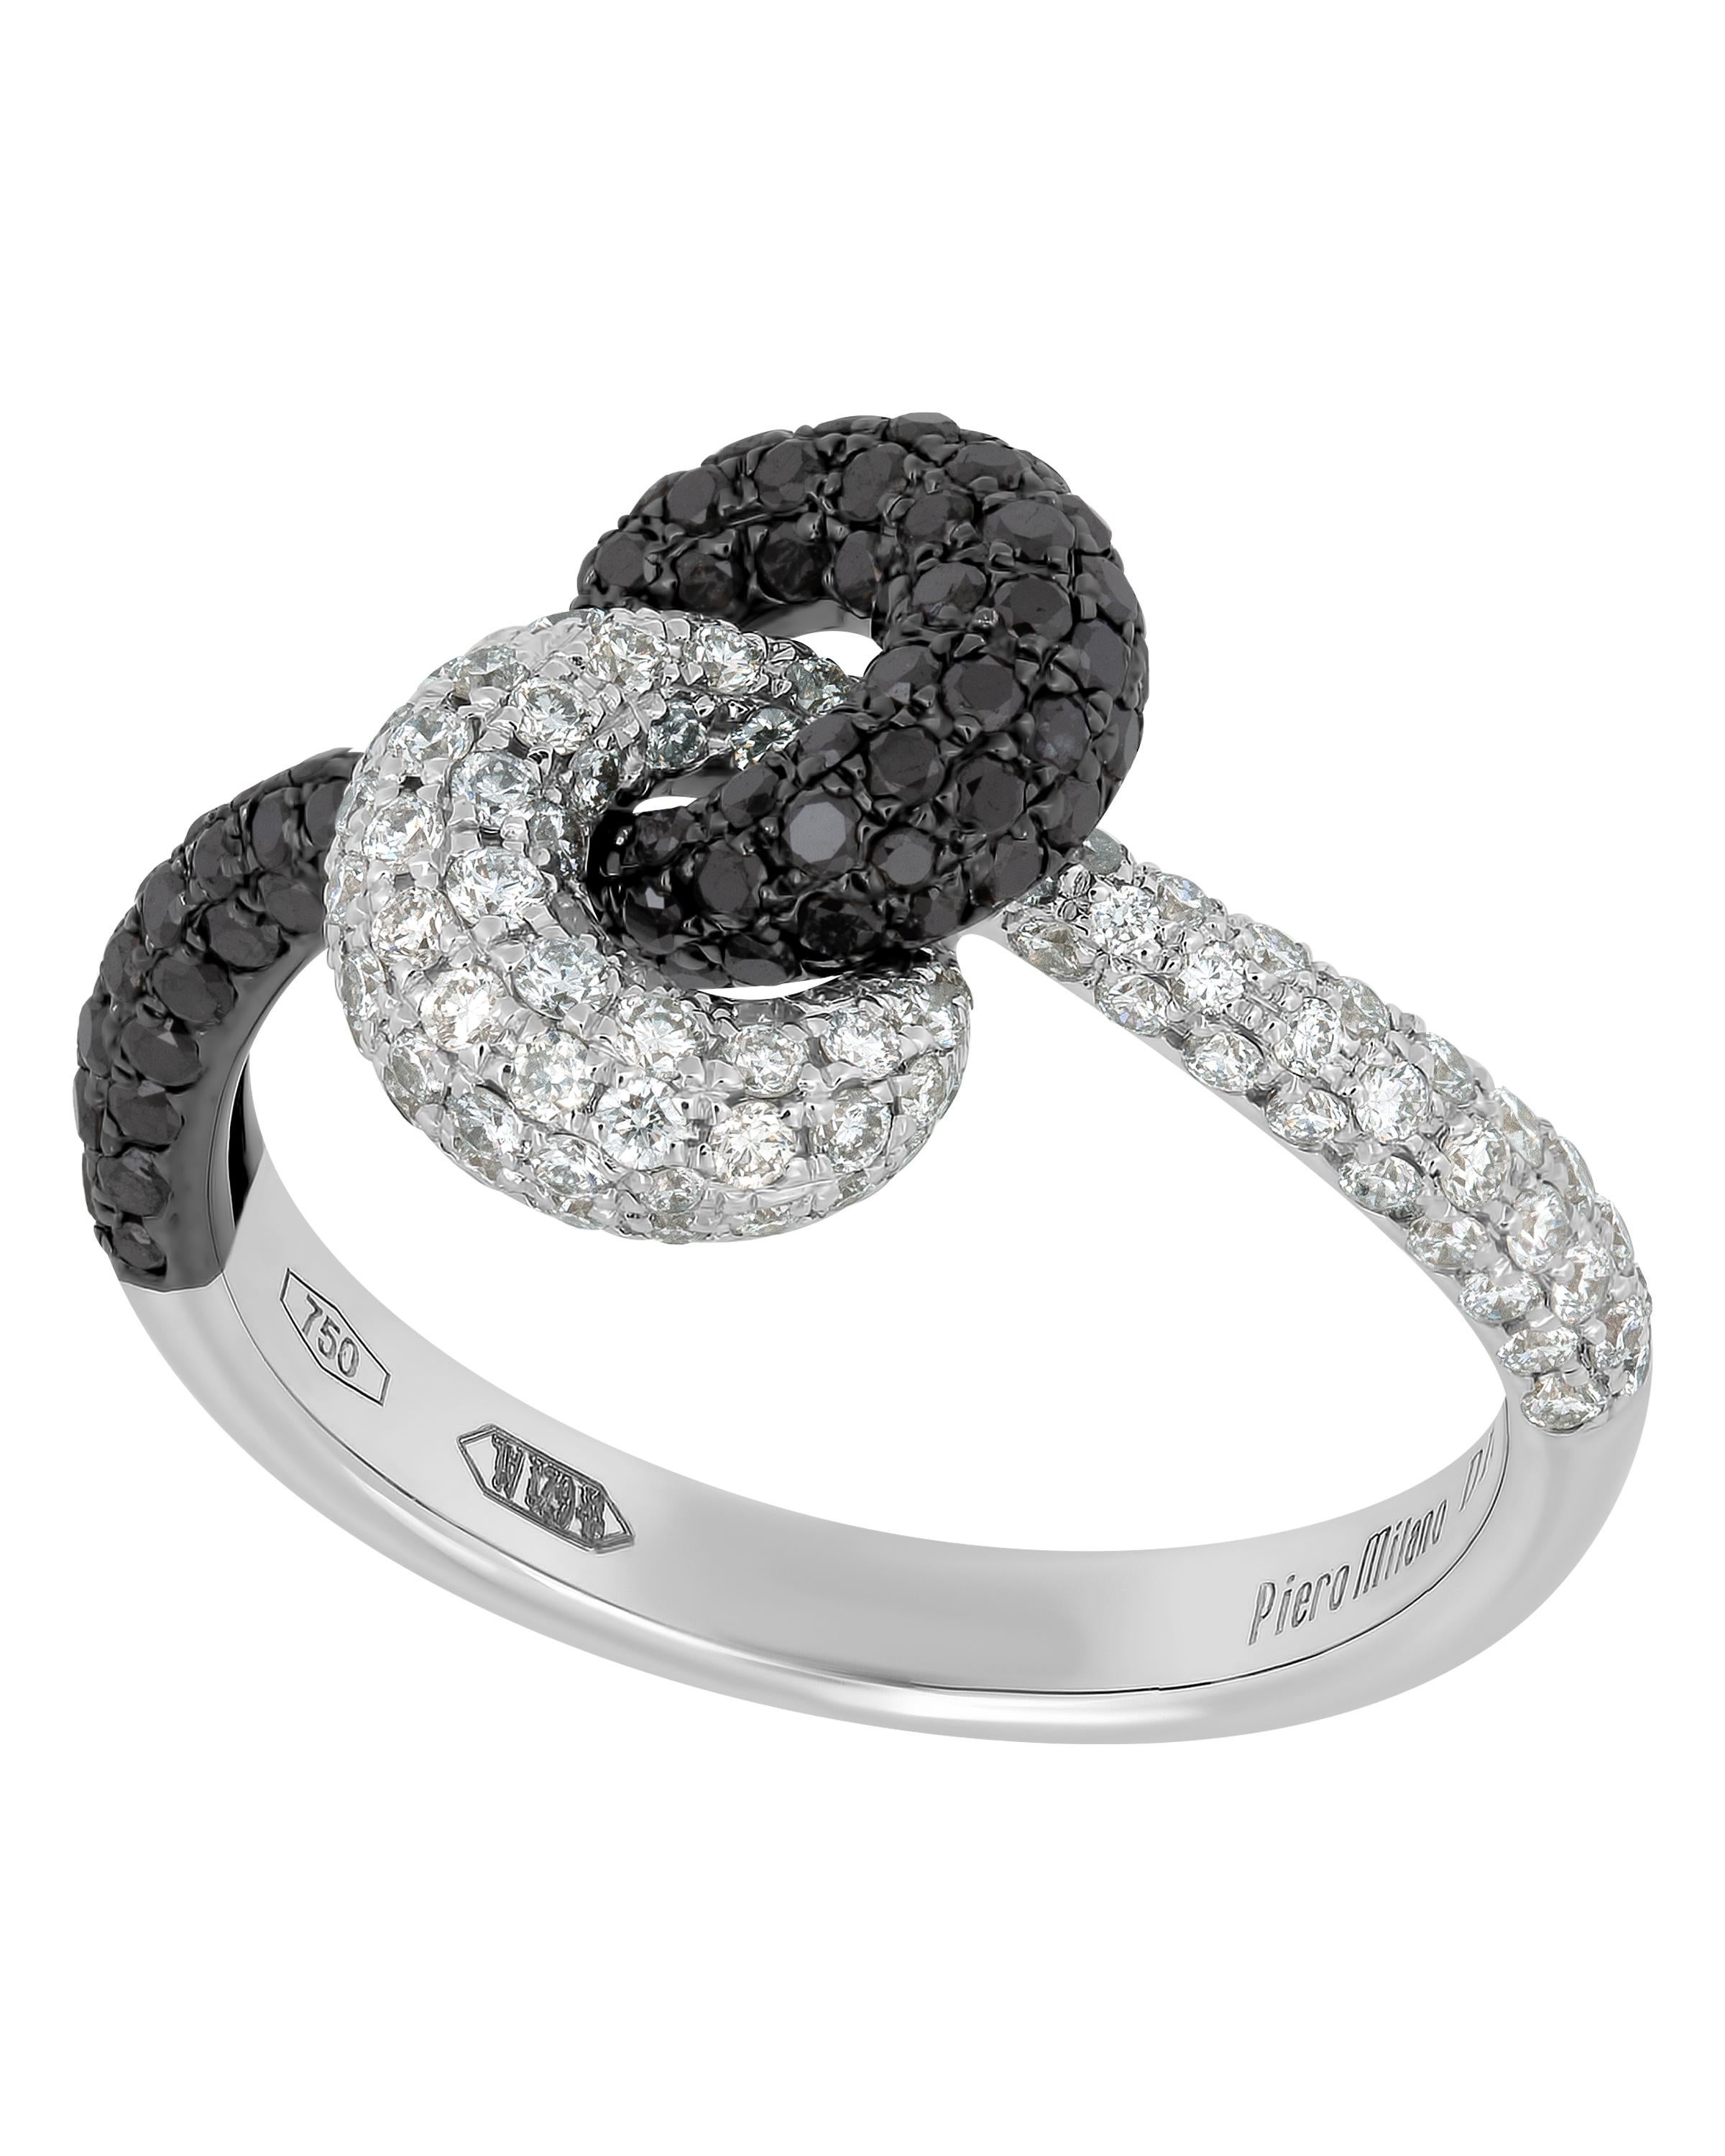 This spectacular Piero Milano 18K White Gold and 18K Black Gold Knot Ring features luscious black (0.69ct twd) and white diamonds (0.63ct twd) twisted into a delicate knot. The ring size is 6.75 (53.8). The Decoration Size is 12.7mm x 8.6mm. The